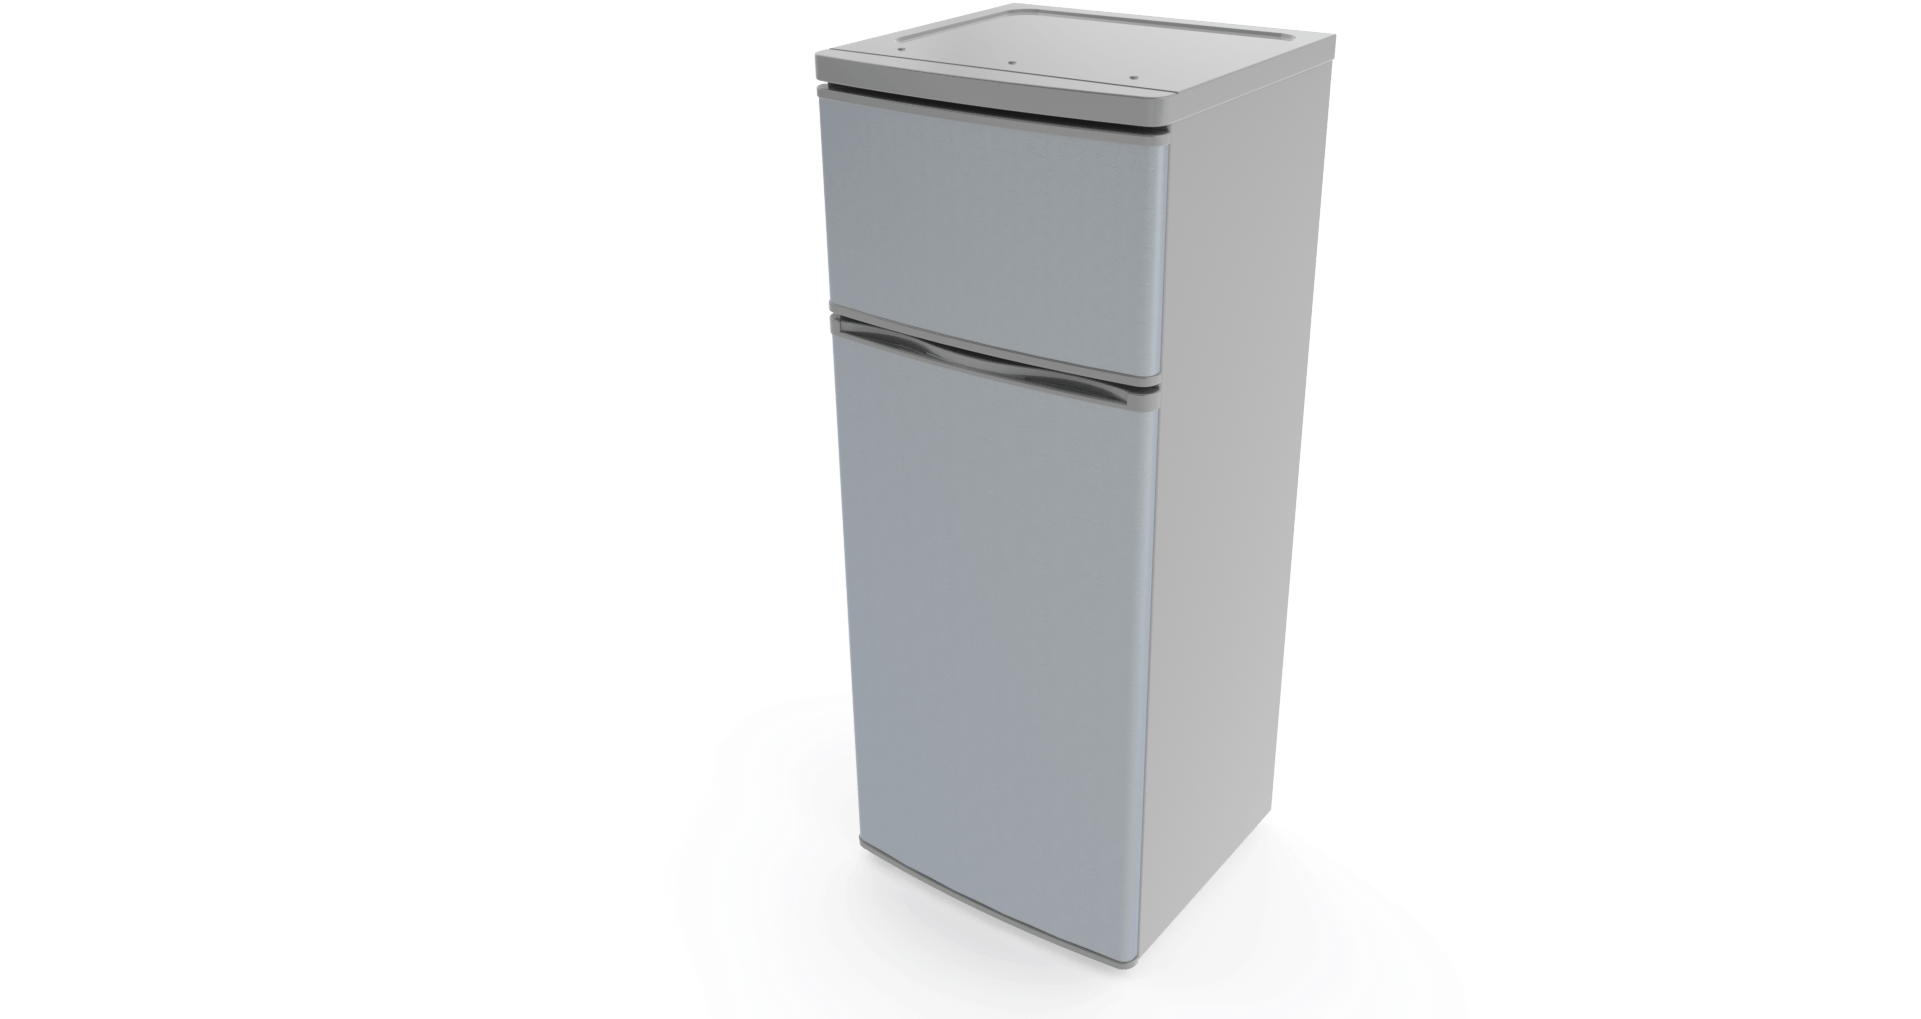 A White Refrigerator With A Black Background